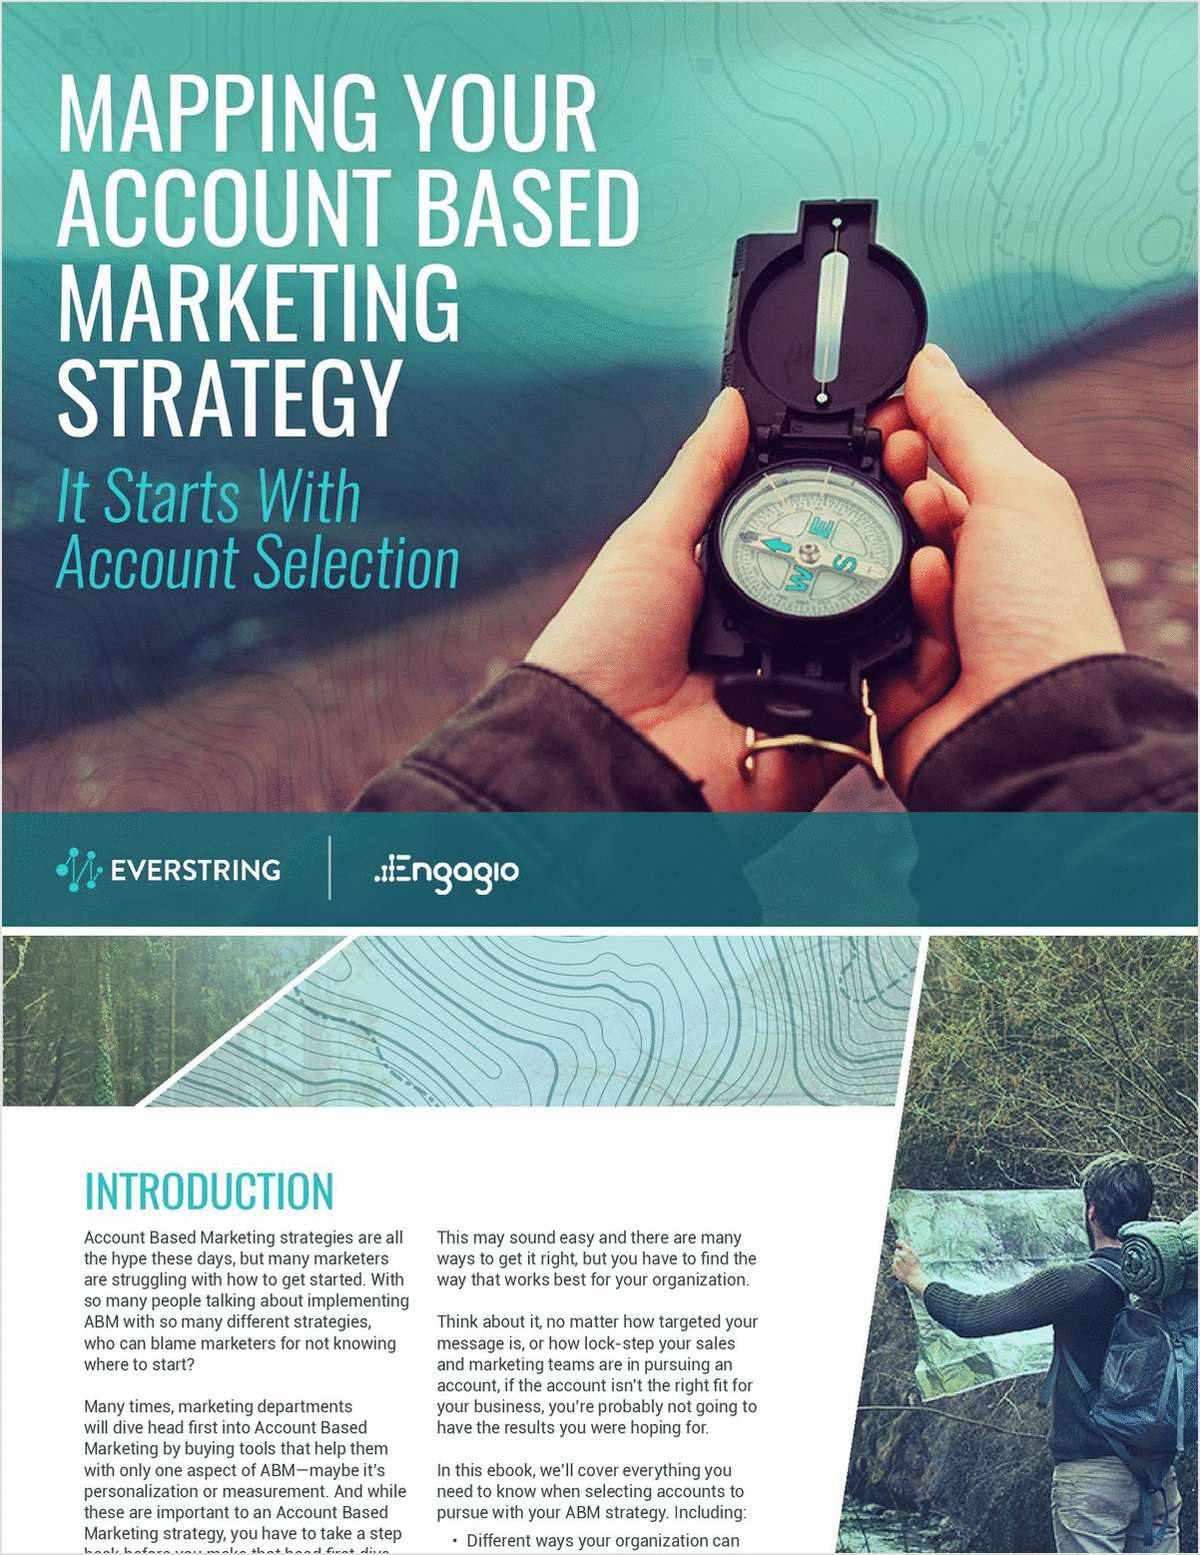 Mapping Your Account Based Marketing Strategy - It Starts With Account Selection